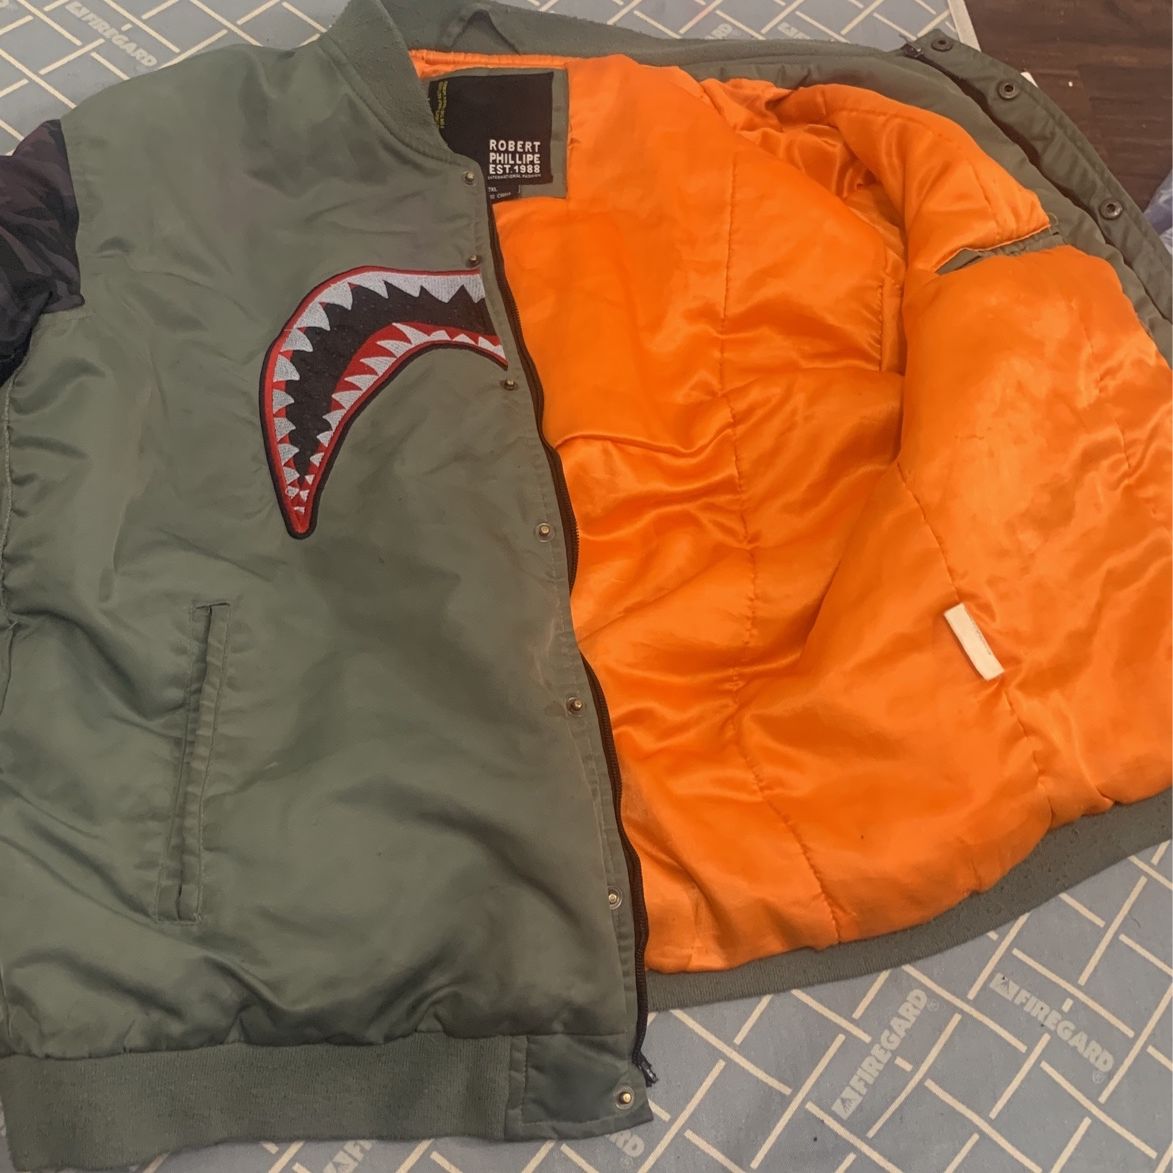 Bape Orange And Green And The Size Is 2XL